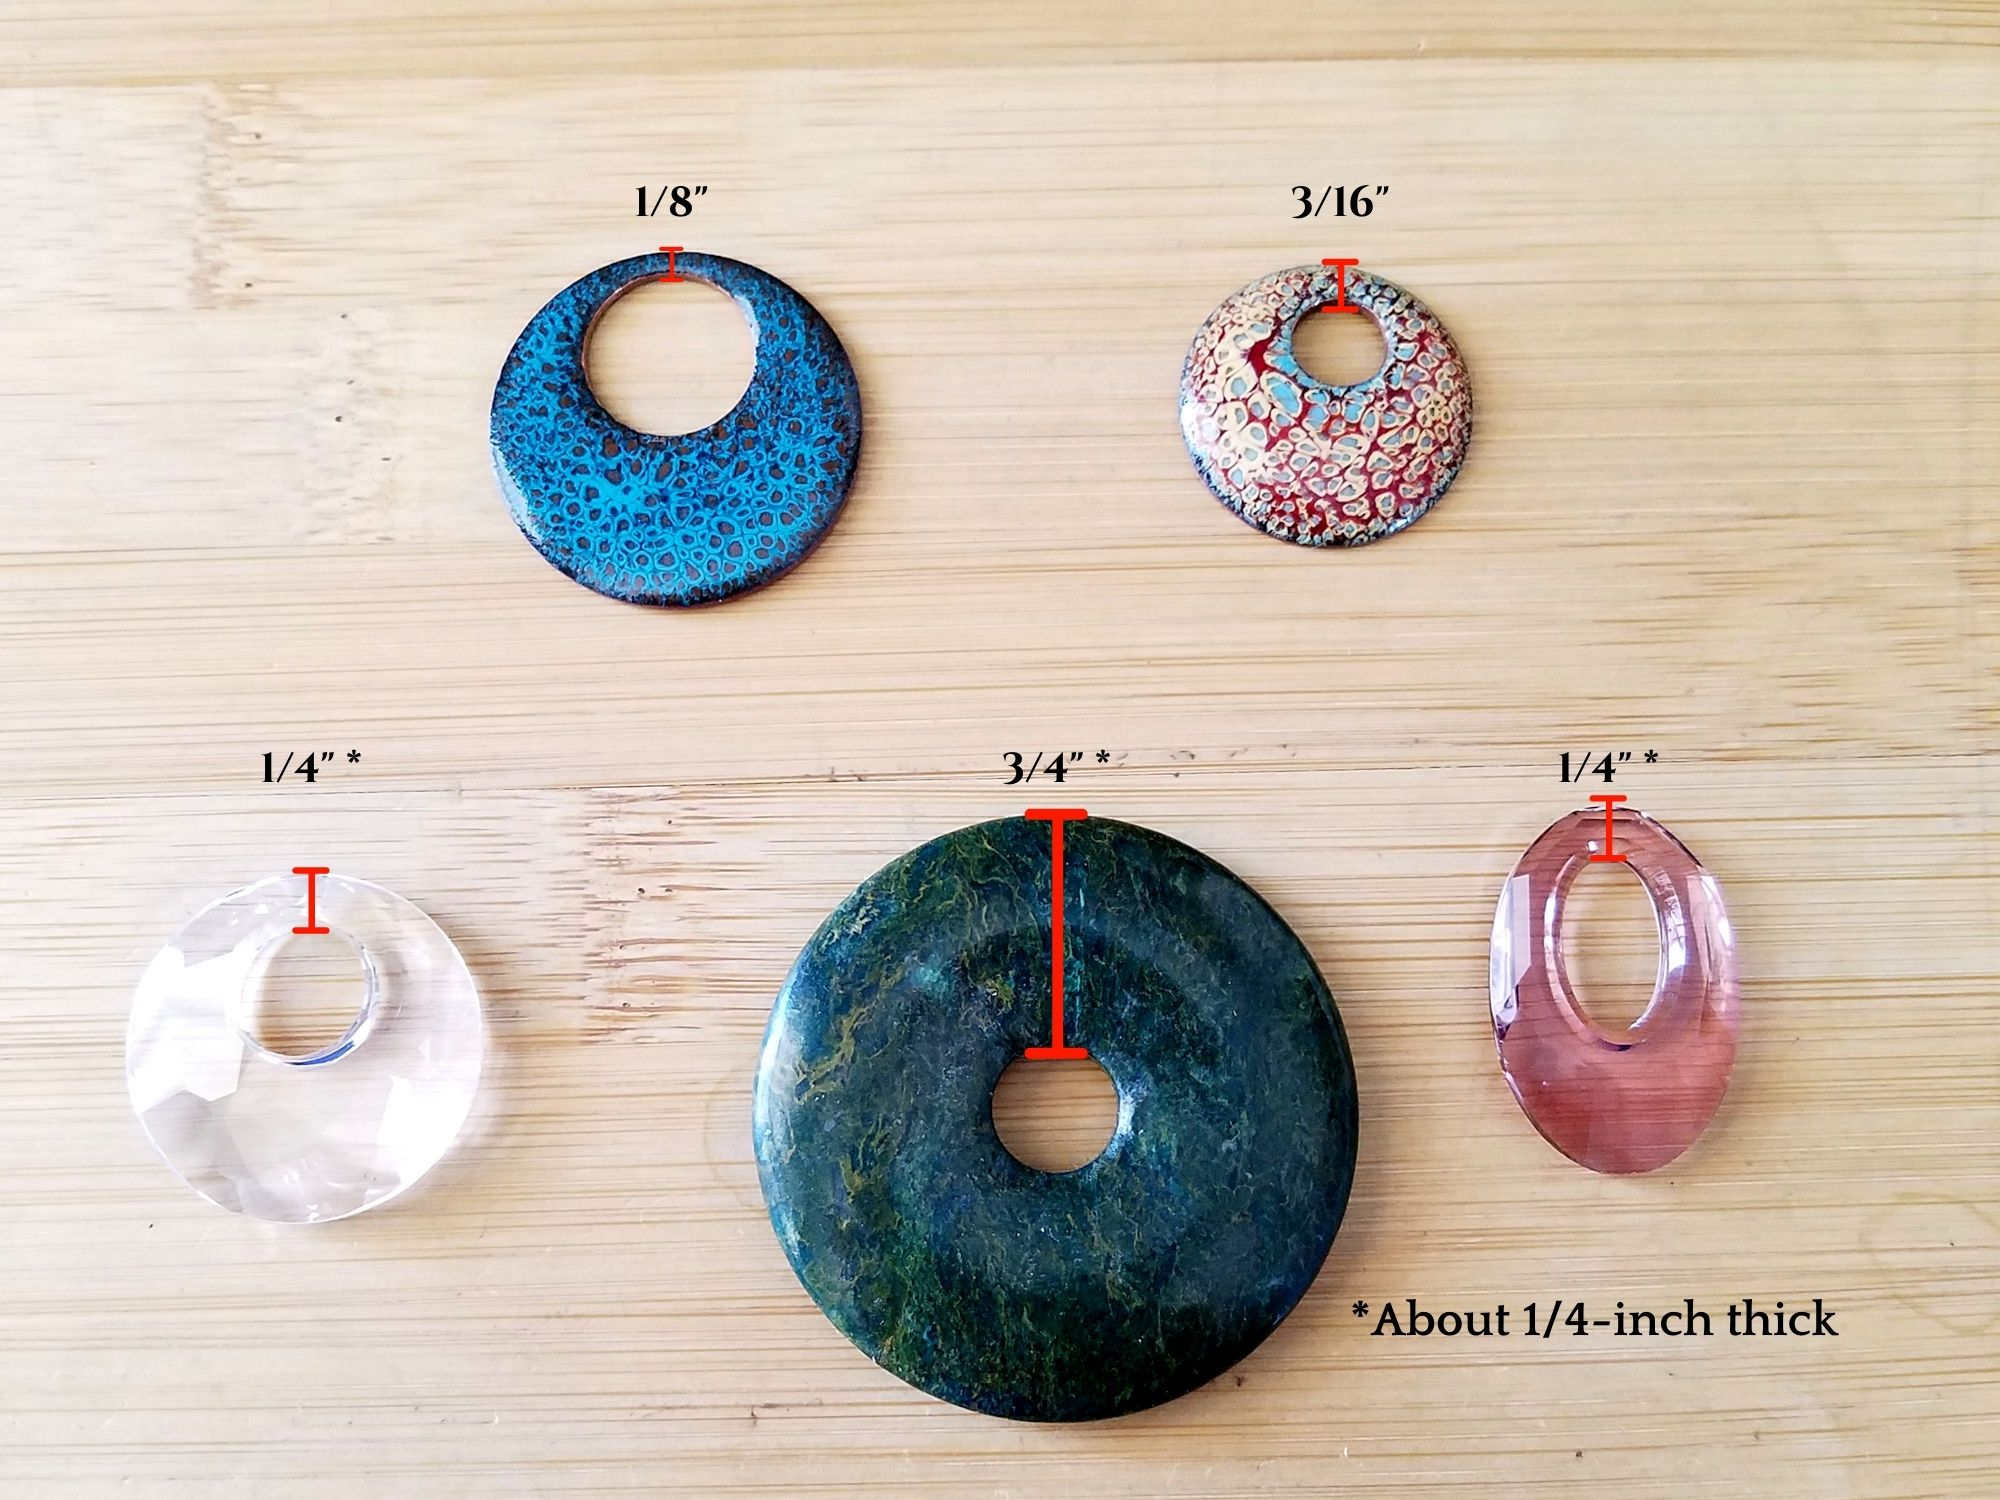 This image shows five different styles and sizes of pendants that work well with the interchangeable Figure 8 weave bail design. 